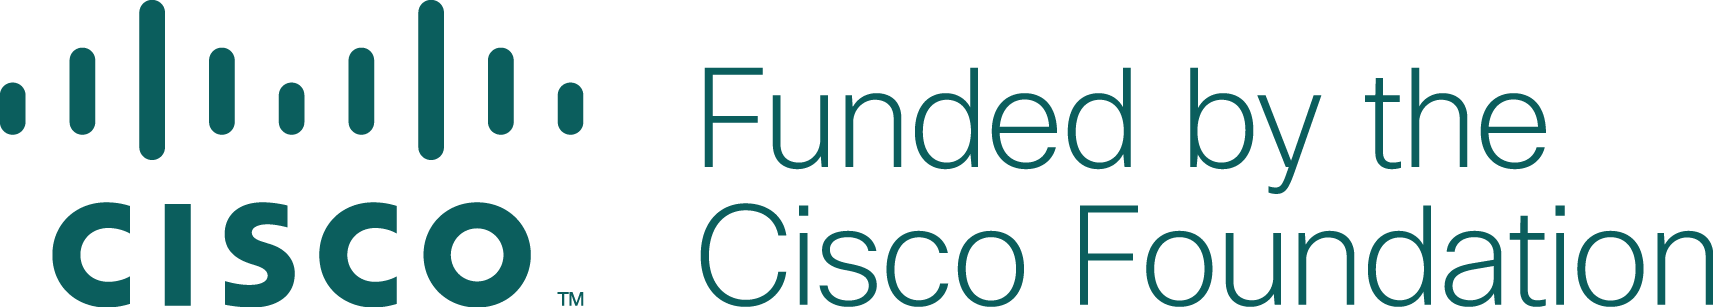 Cisco_Funded_by_Cisco_Foundation_Lockup.png